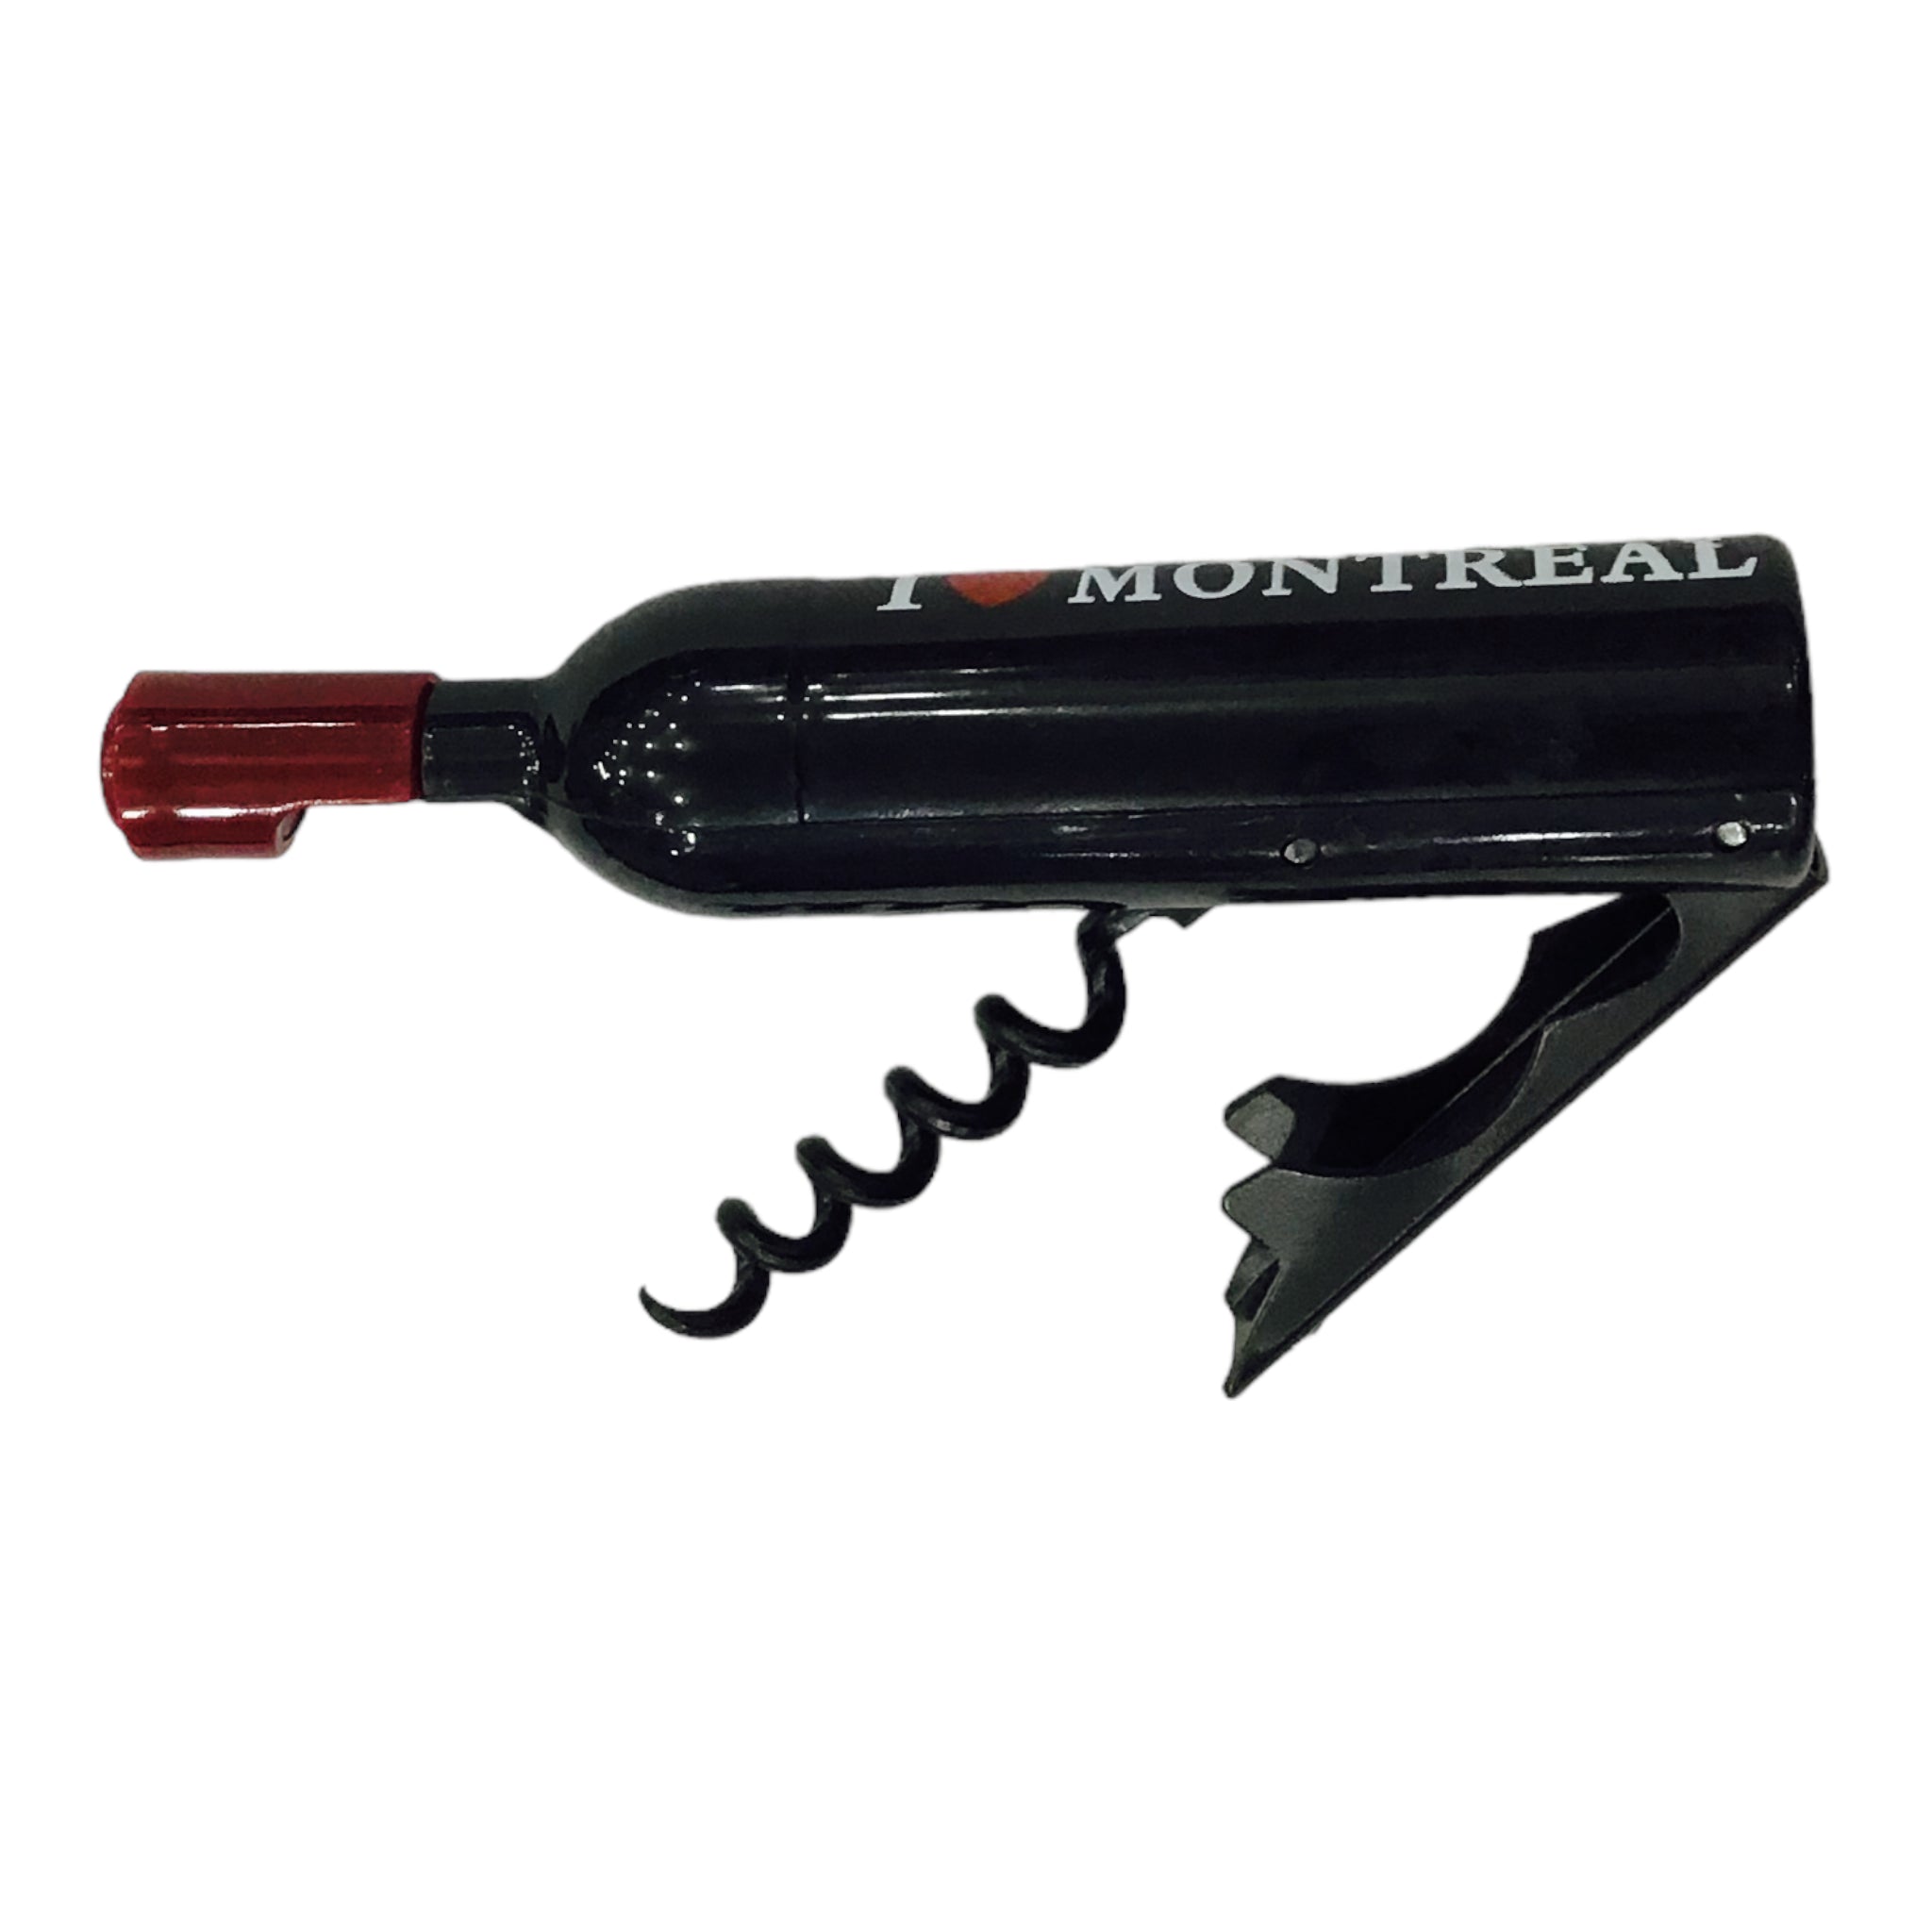 I ❤️ Montreal 2 in 1 Opener Bottle Shaped Wine Corkscrew Magnet with Spiral Head Foldable Beer Bottle Opener Kitchen Opening Tools Bar Accessories Gadgets